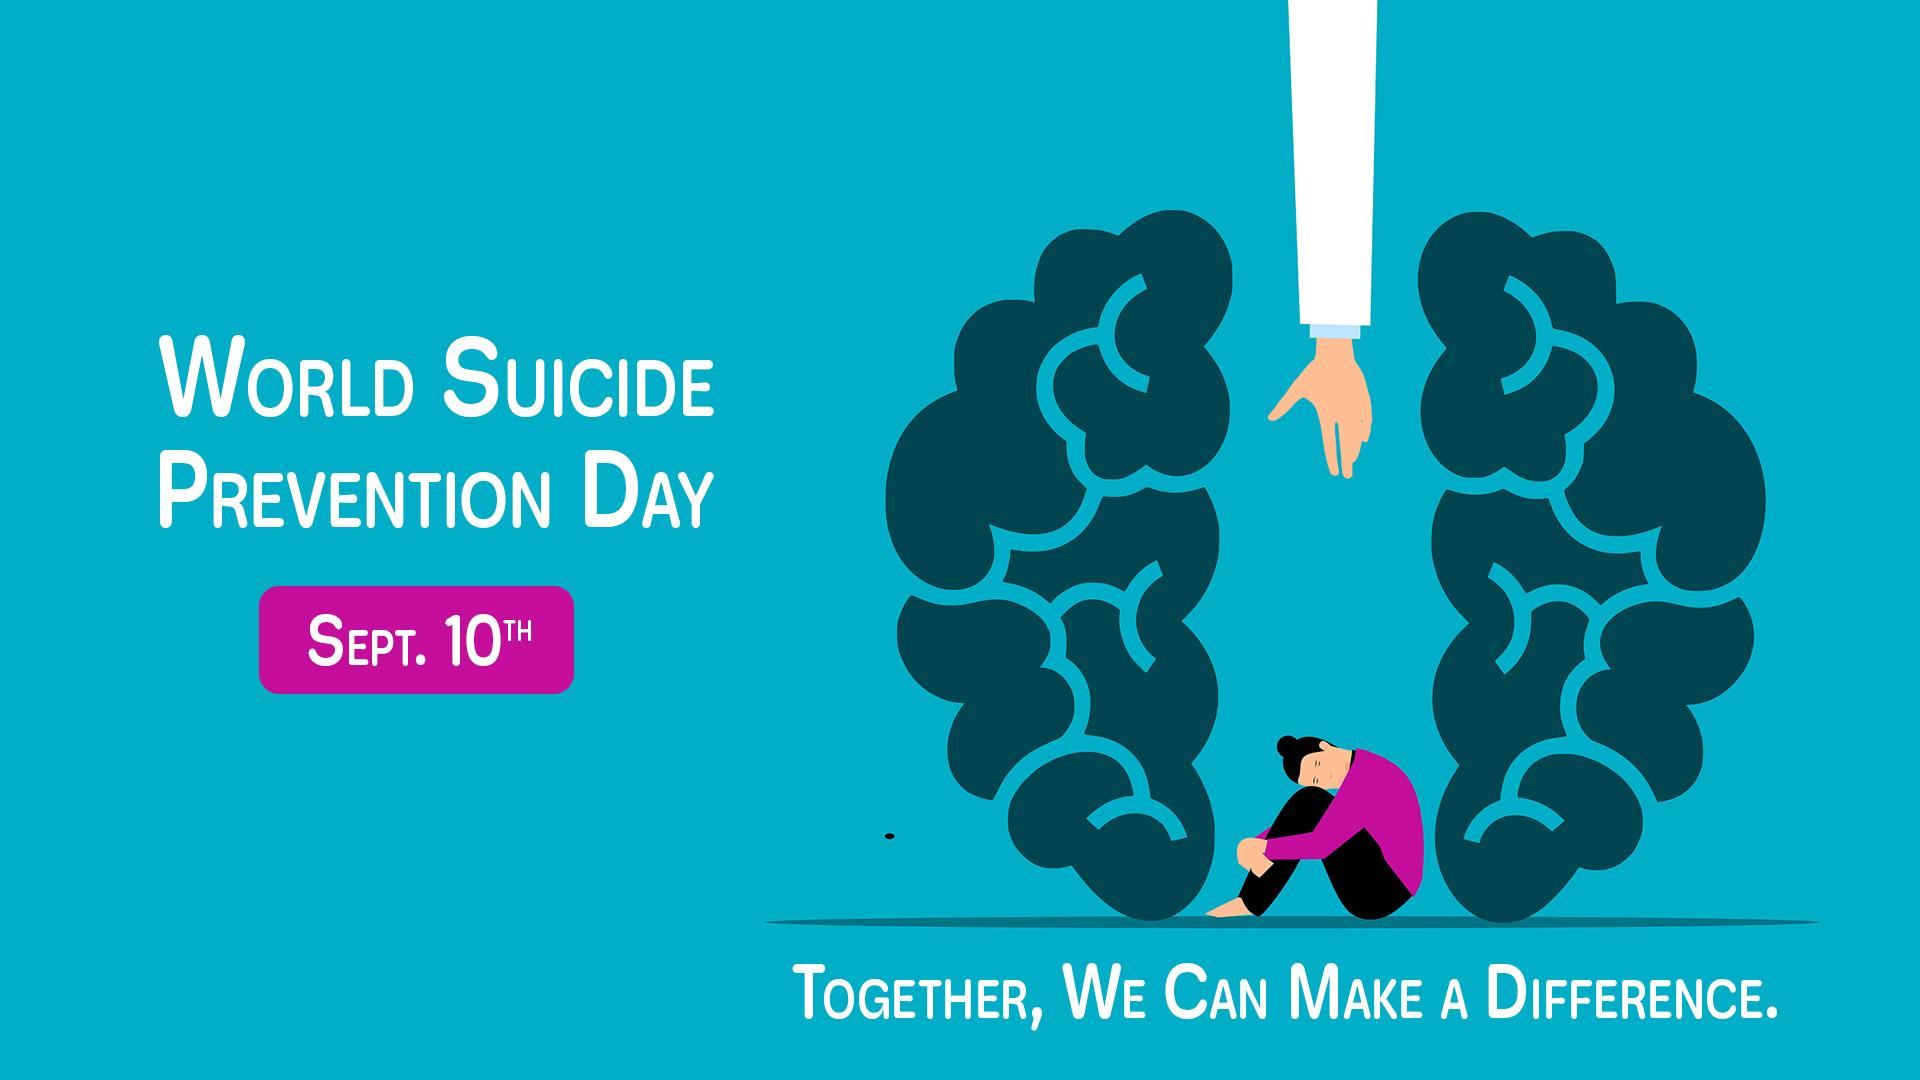 Blue background with a navy blue illustrated brain split down the middle with a hand reaching down from the top of the graphic. Below the hand there is a person sitting on the ground with their arms wrapped around their legs and their head resting on their knees. Blow the person reads Together, We Can Make a Difference. World Suicide Prevention Day September 10th is written in white letters on the left.